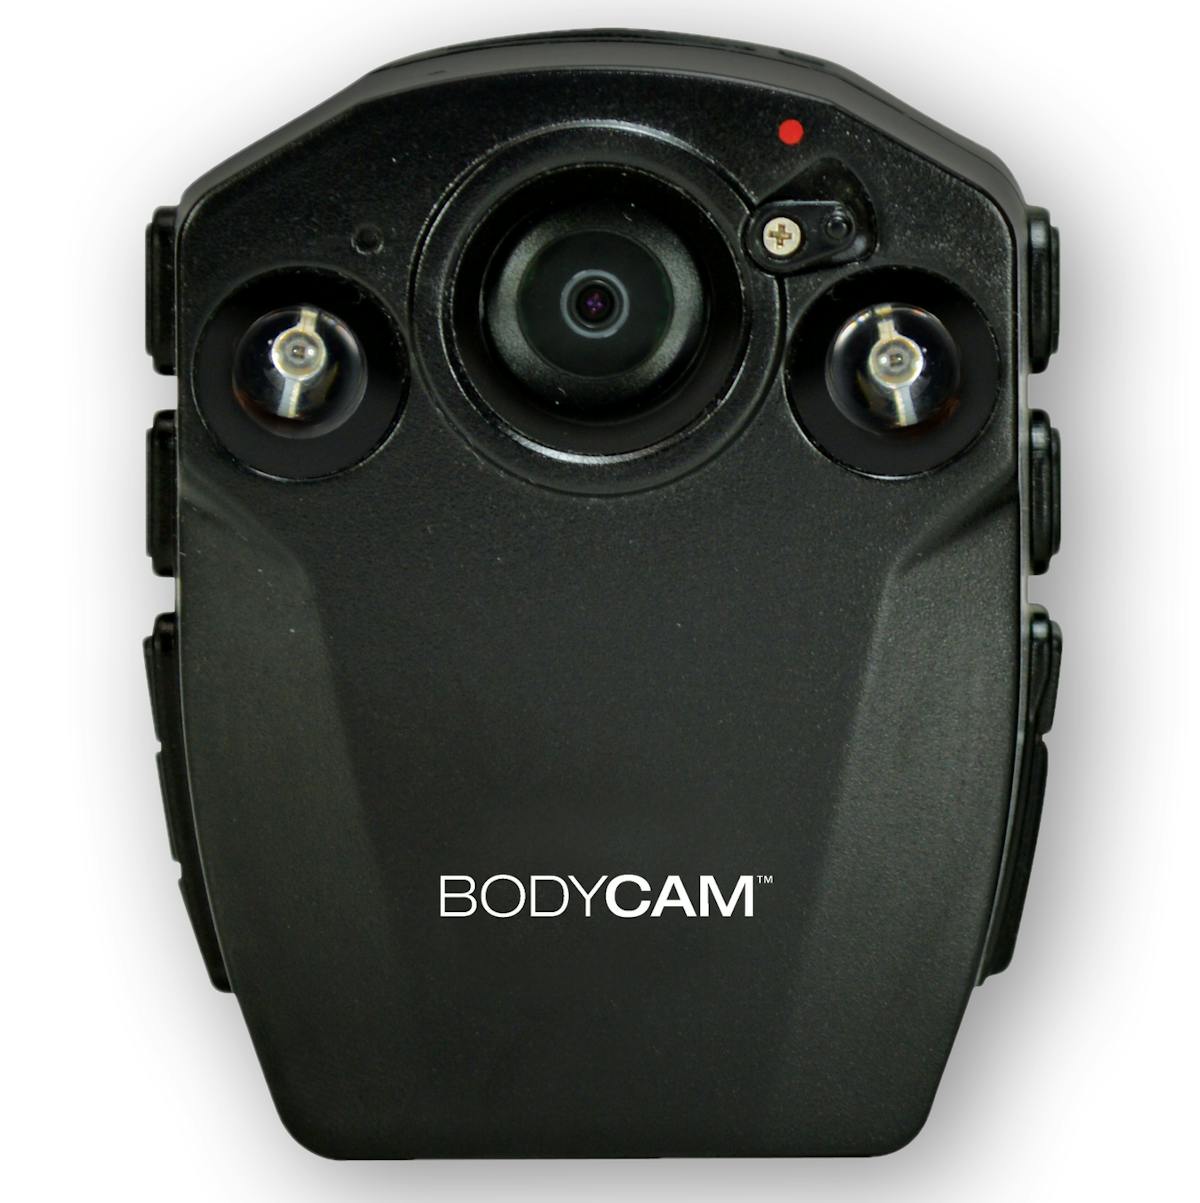 The BC-100 model (seen here), from BODYCAM by Pro-Vision Video Systems, was launched in 2013 and discontinued in 2016 when the BC-300 came out. The BC-100 had a 4 hour record time (10 hours if you had the optional power pack), due to a larger battery the BC-300 upped that to 12 continuous hours.